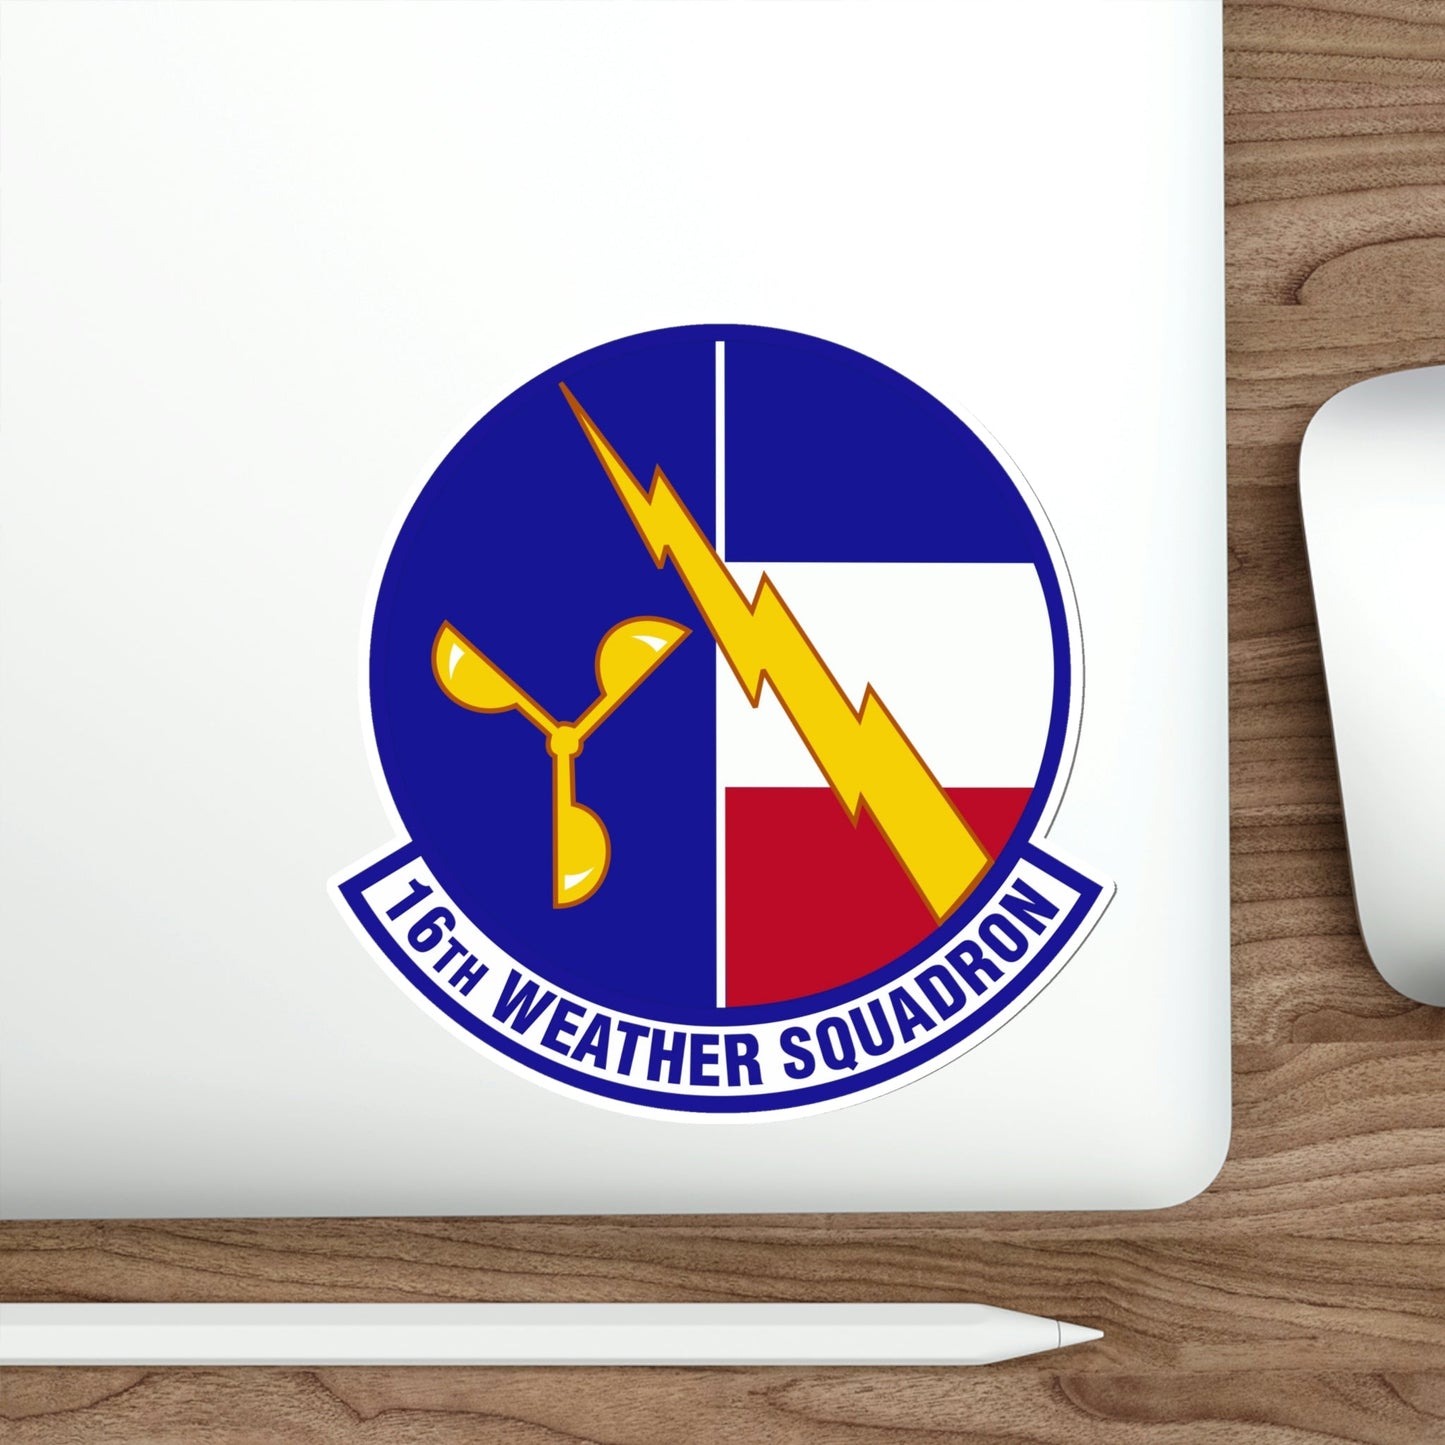 16 Weather Squadron AFWA (U.S. Air Force) STICKER Vinyl Die-Cut Decal-The Sticker Space